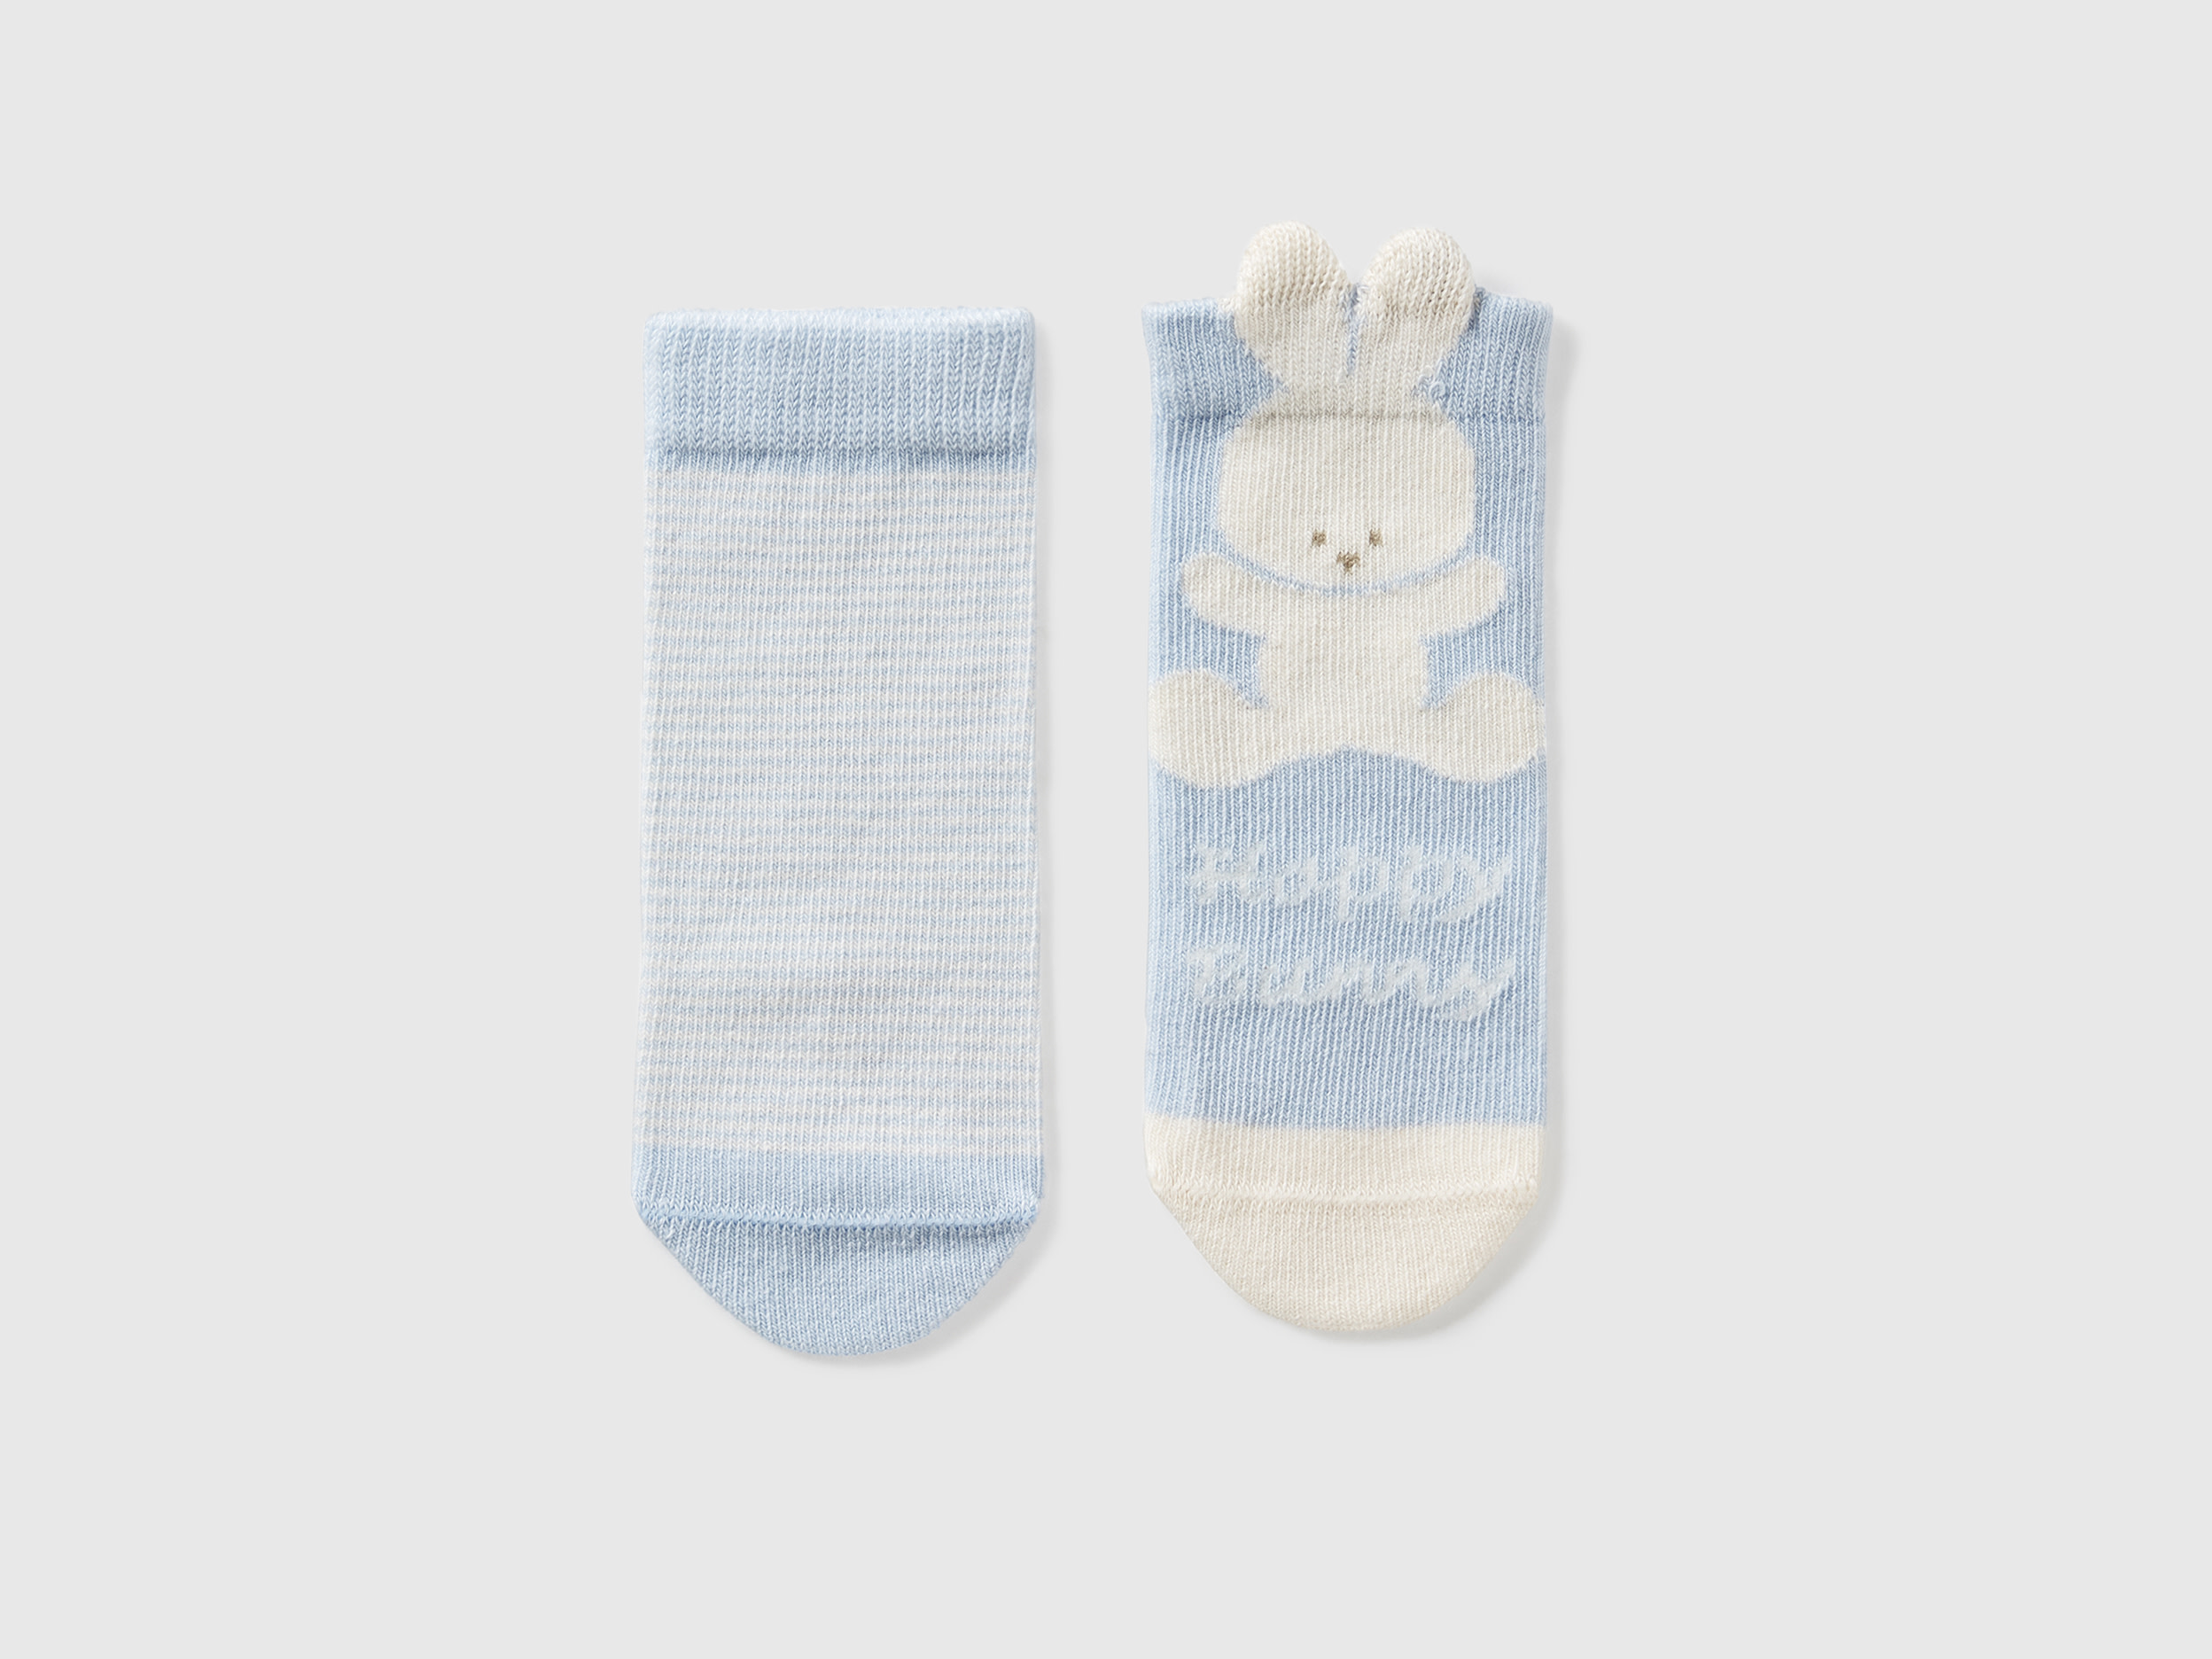 Benetton, Sock Set With Stripes And Bunny, size 0-6, Sky Blue, Kids